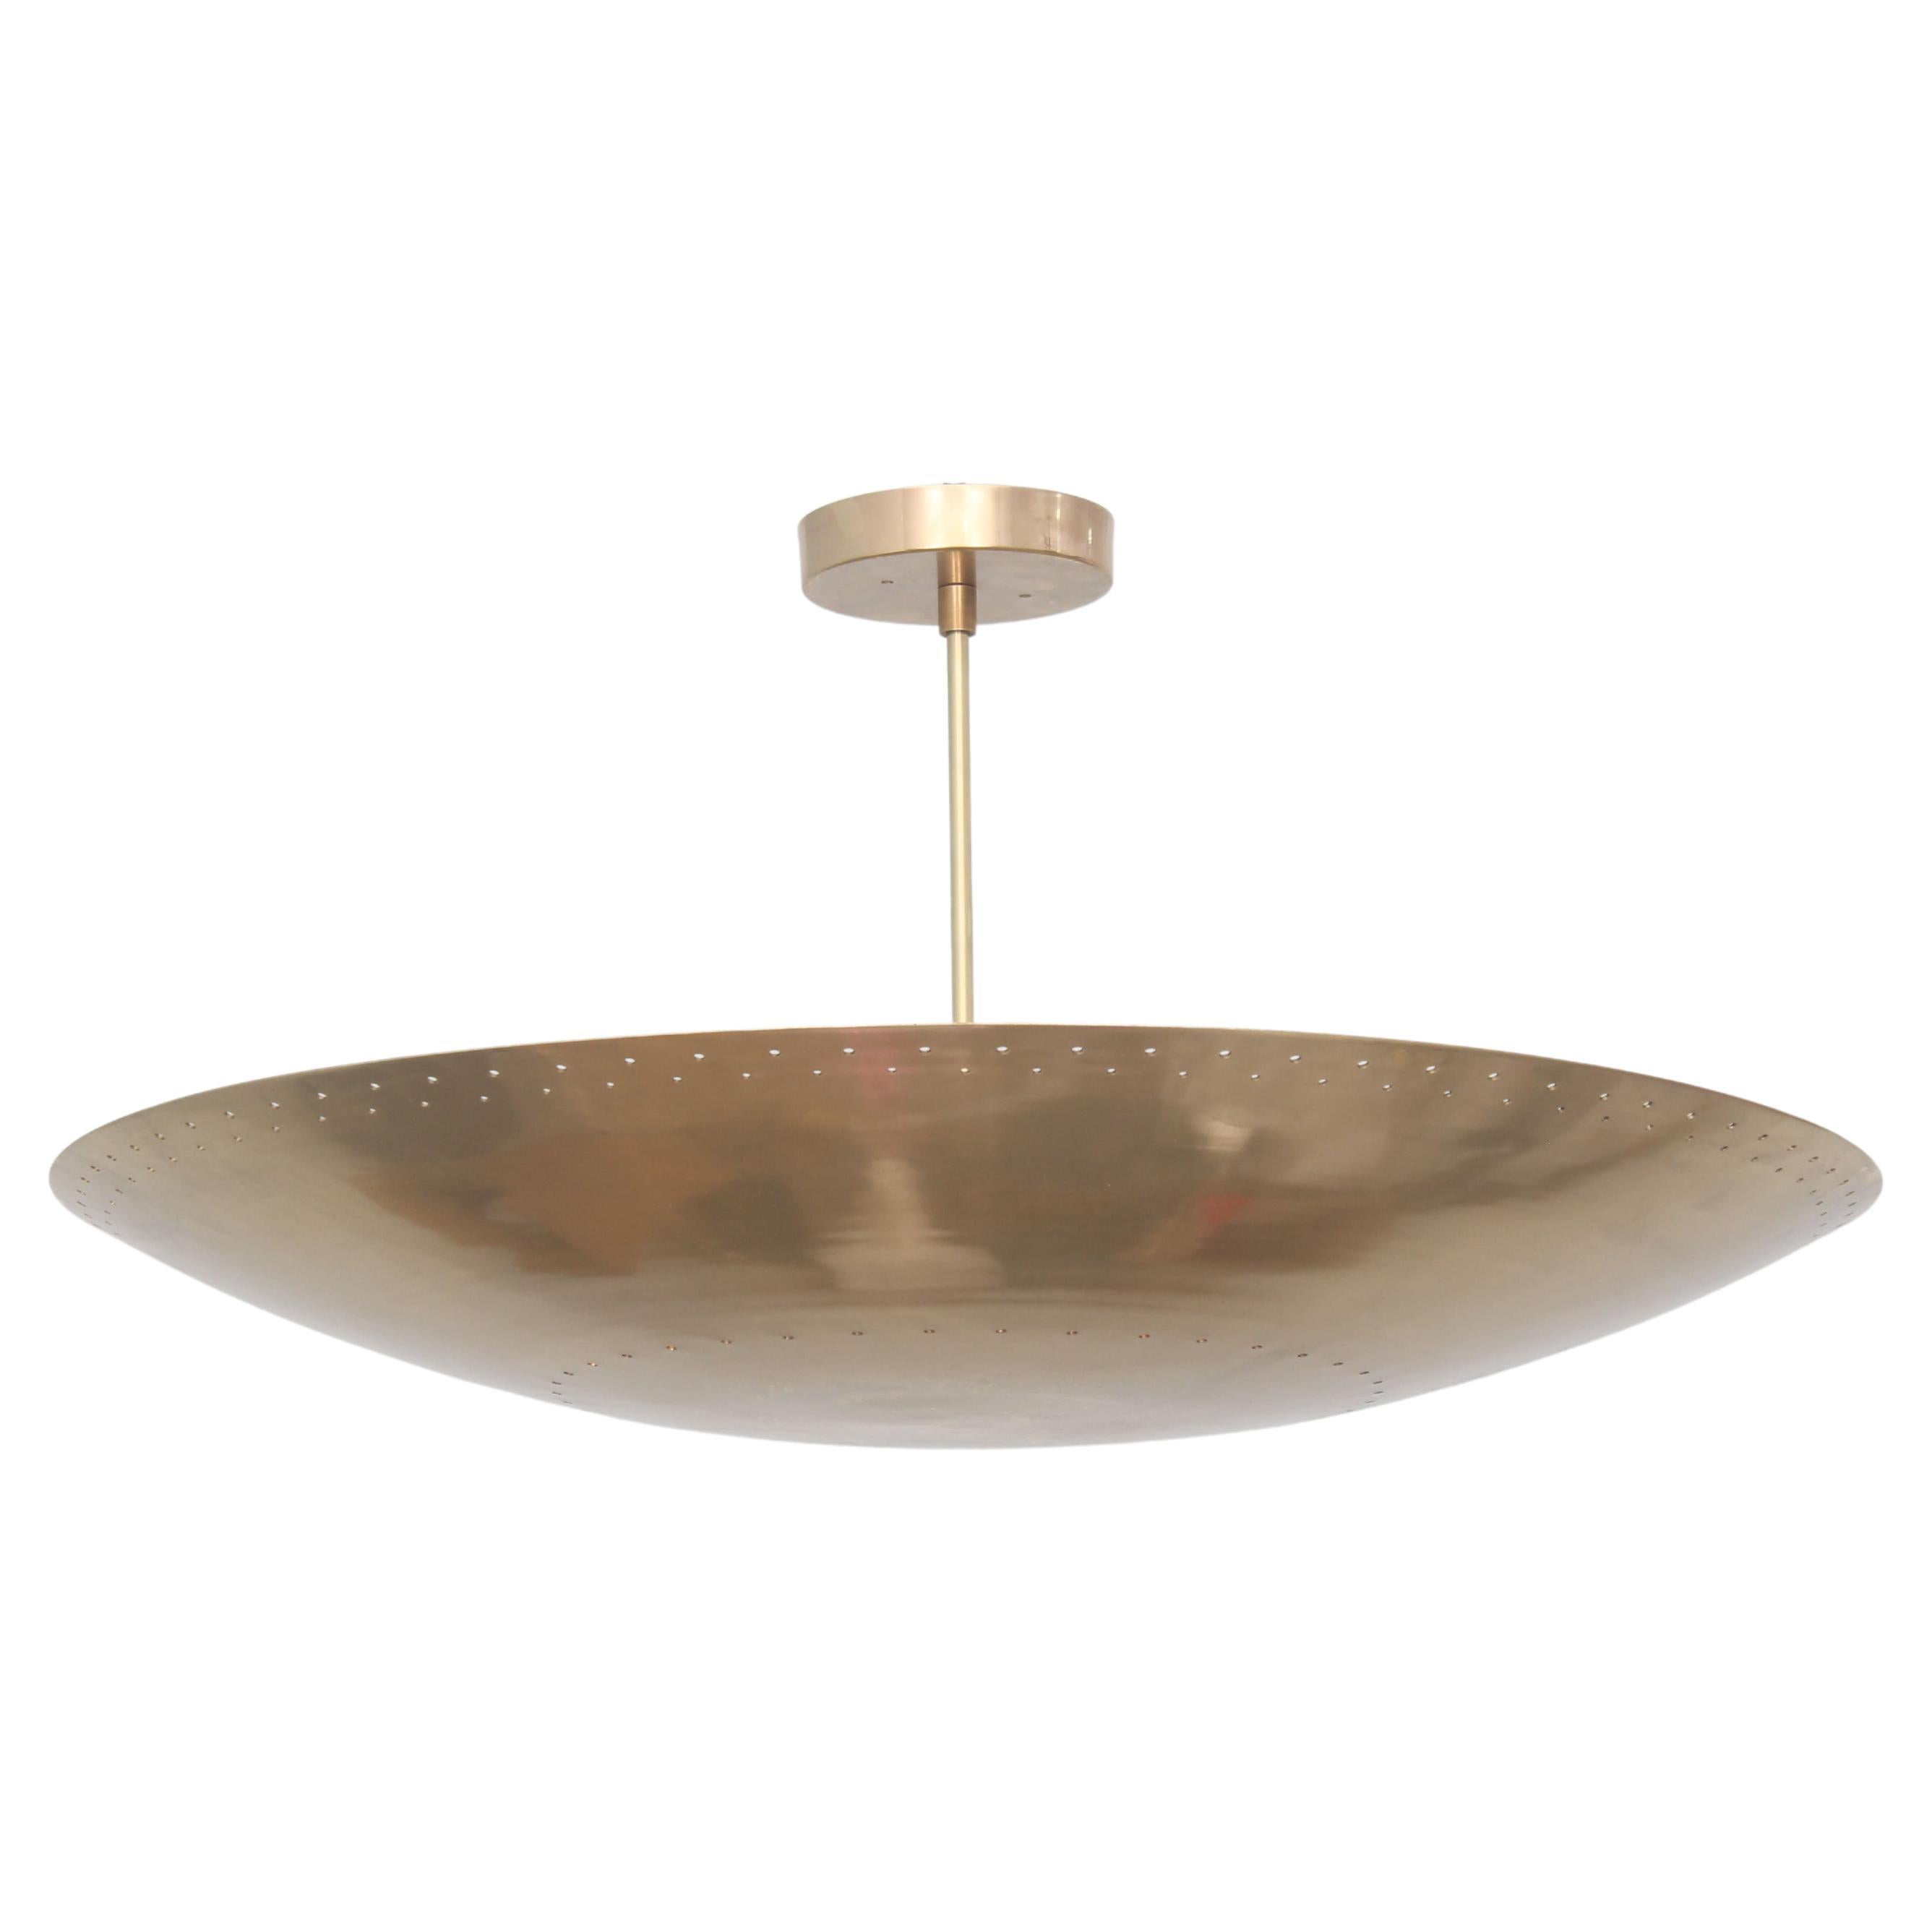 29 inches huge concave pierced brass pendant or flushmount. 

Select from 2 pierced motif ; Edge and middle section or fully pierced ( 2 last images ). 

Contain 6 E26 socket rated at 40 watt each. 

Drop rod made to youre requirement.